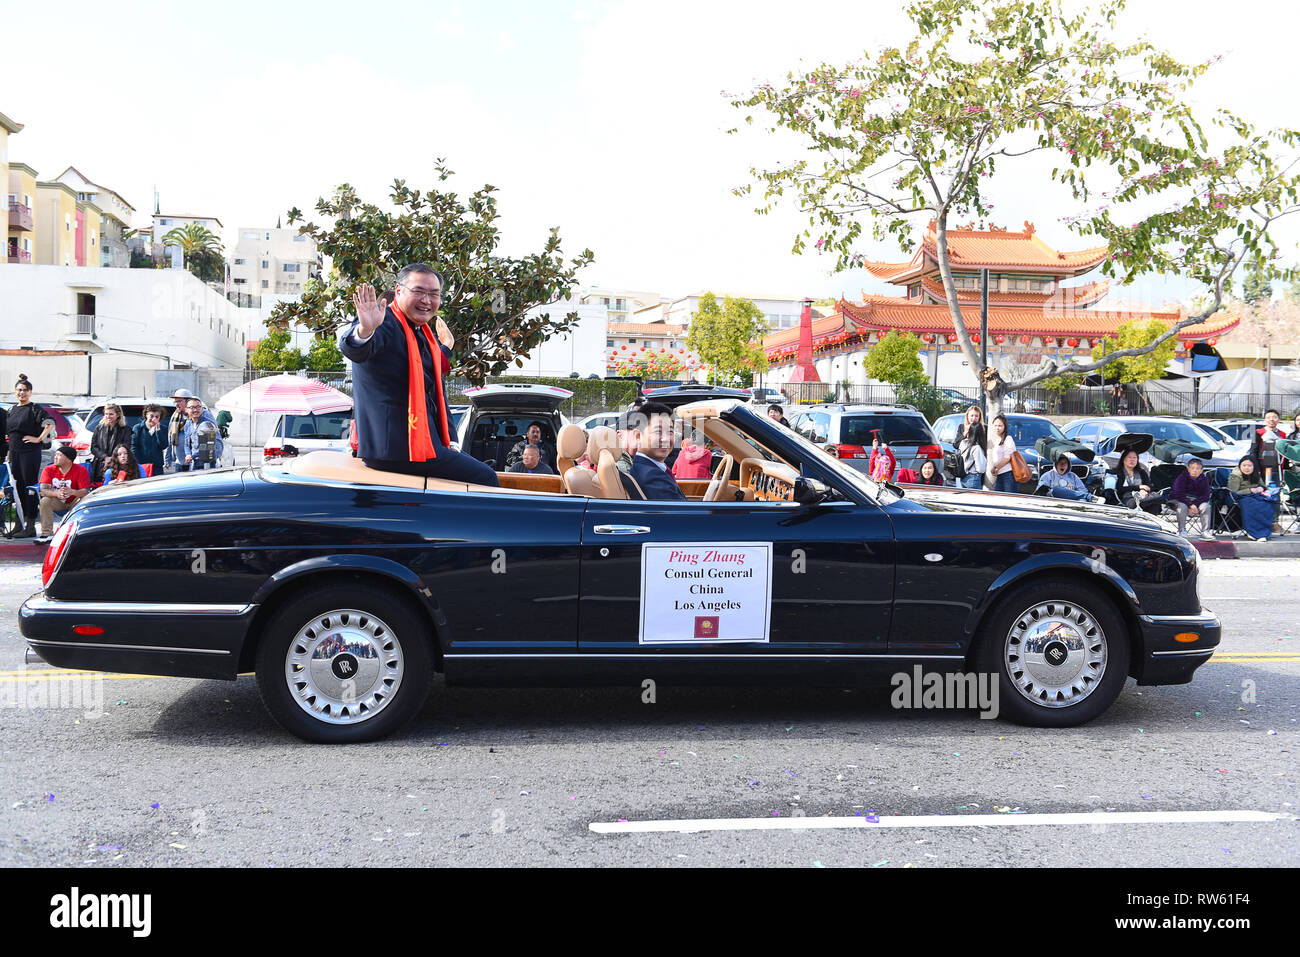 LOS ANGELES - Februar 9, 2019: Ping Zhang der Generalkonsul Chinas in der Los Angeles Chinese New Year Parade. Stockfoto